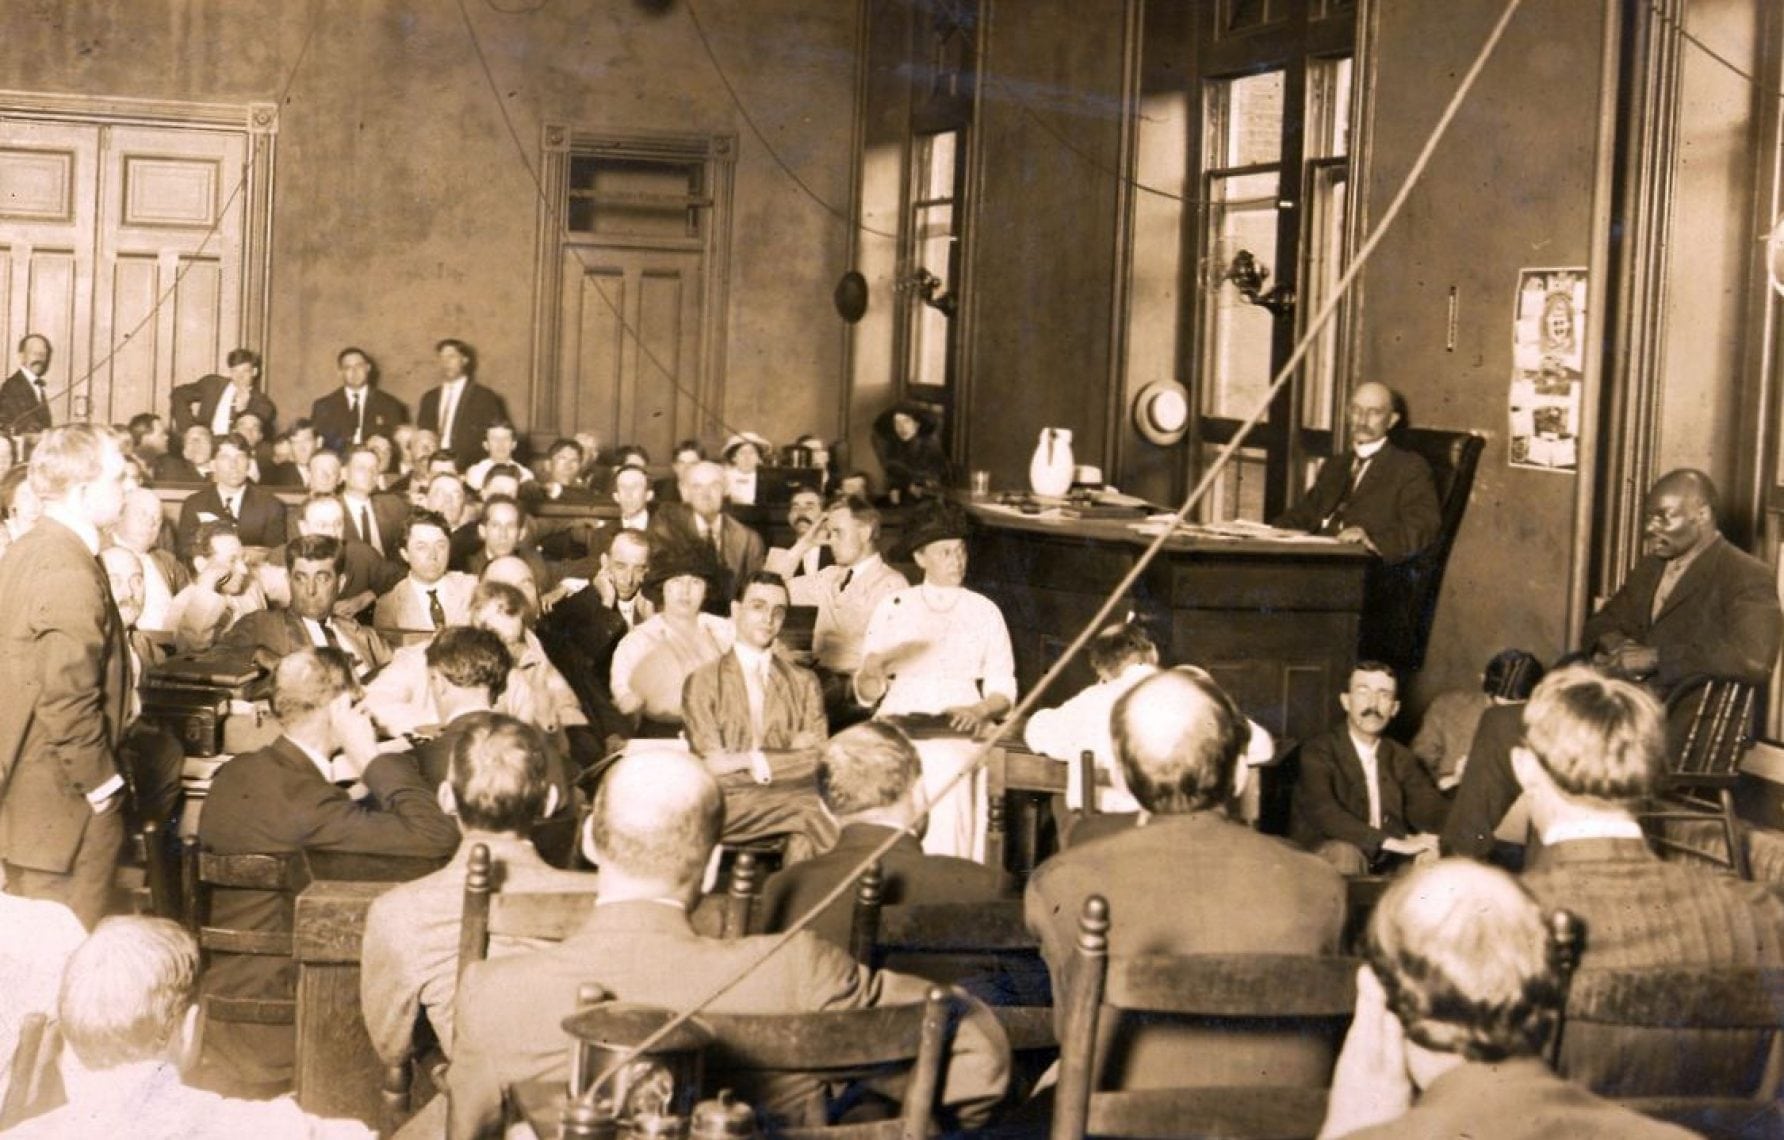 Photo of the trial of Leo Frank, shot on July 28, 1913. Prosecutor Hugh Dorsey, standing at left, is examining witness Newt Lee, at right. Leo Frank who is seated in the centre (Page 3 of Atlanta Journal July 29, 1913)